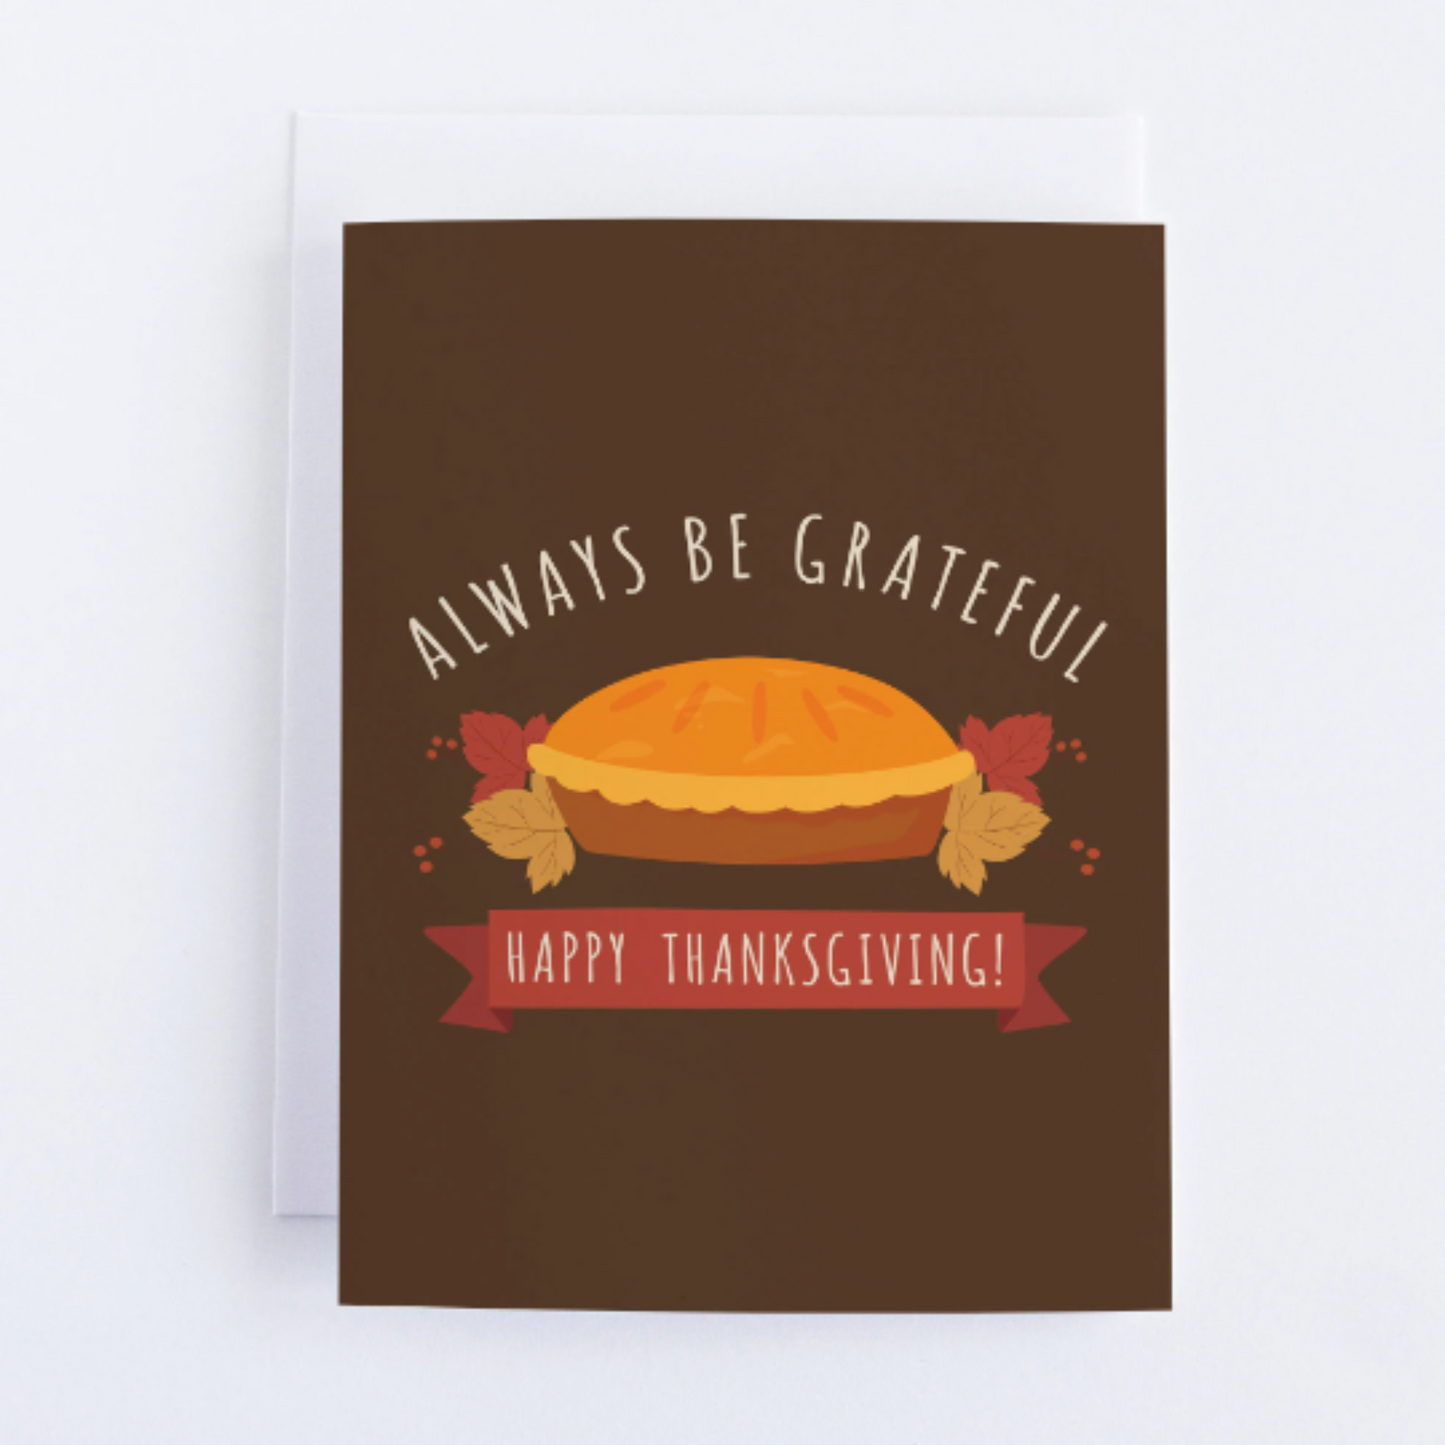 Happy Thanksgiving Greeting Card: Always Be Grateful, Note Card.